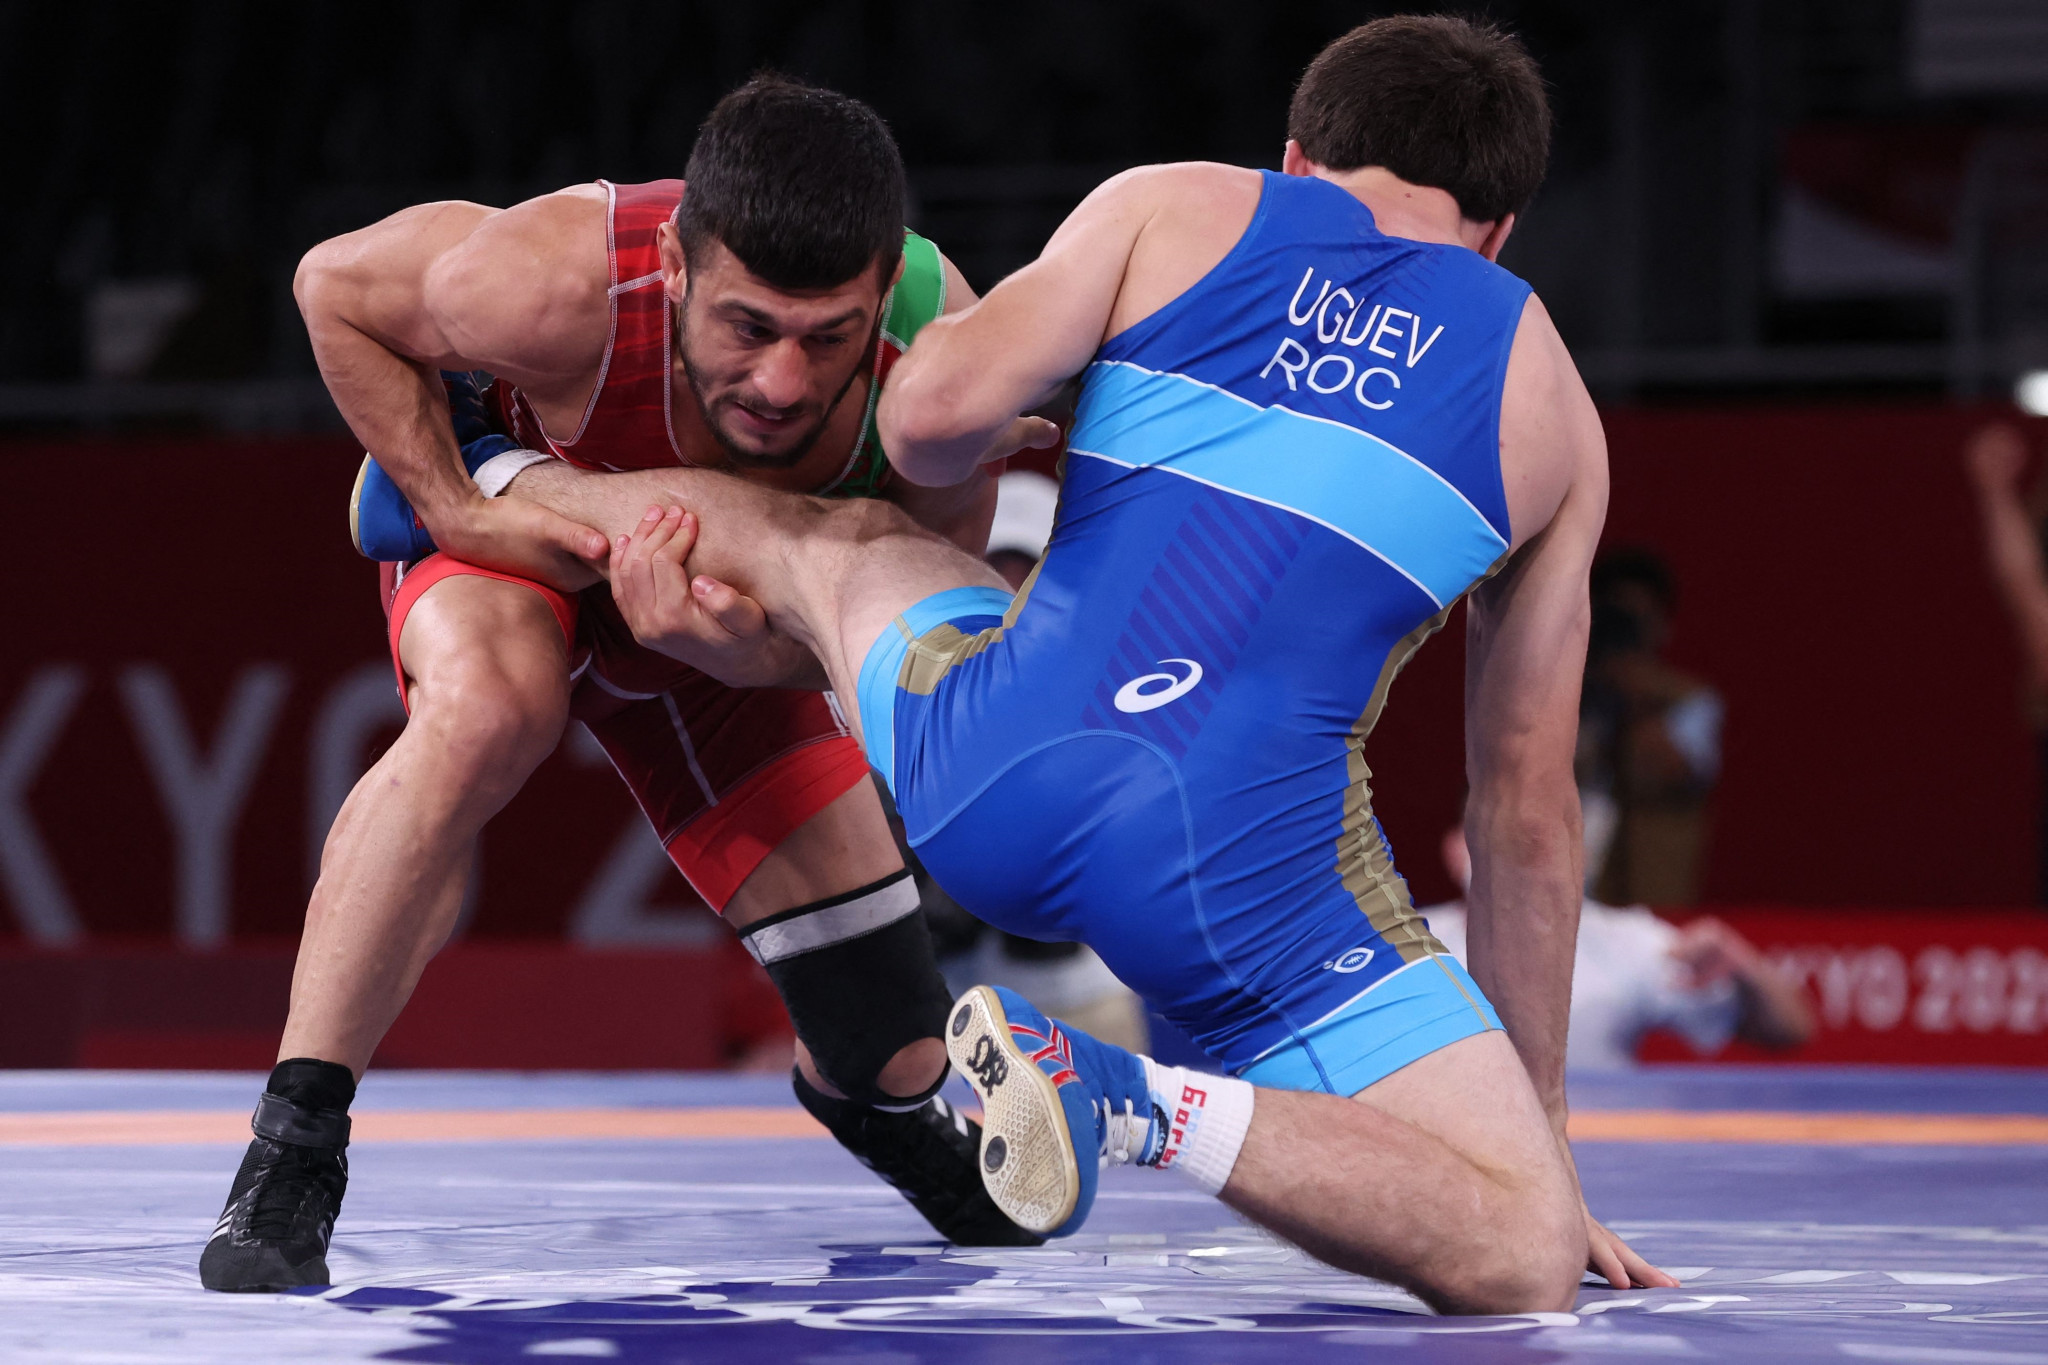 UWW looking to "simplify" readmission of Russian wrestlers, claims Mamiashvili